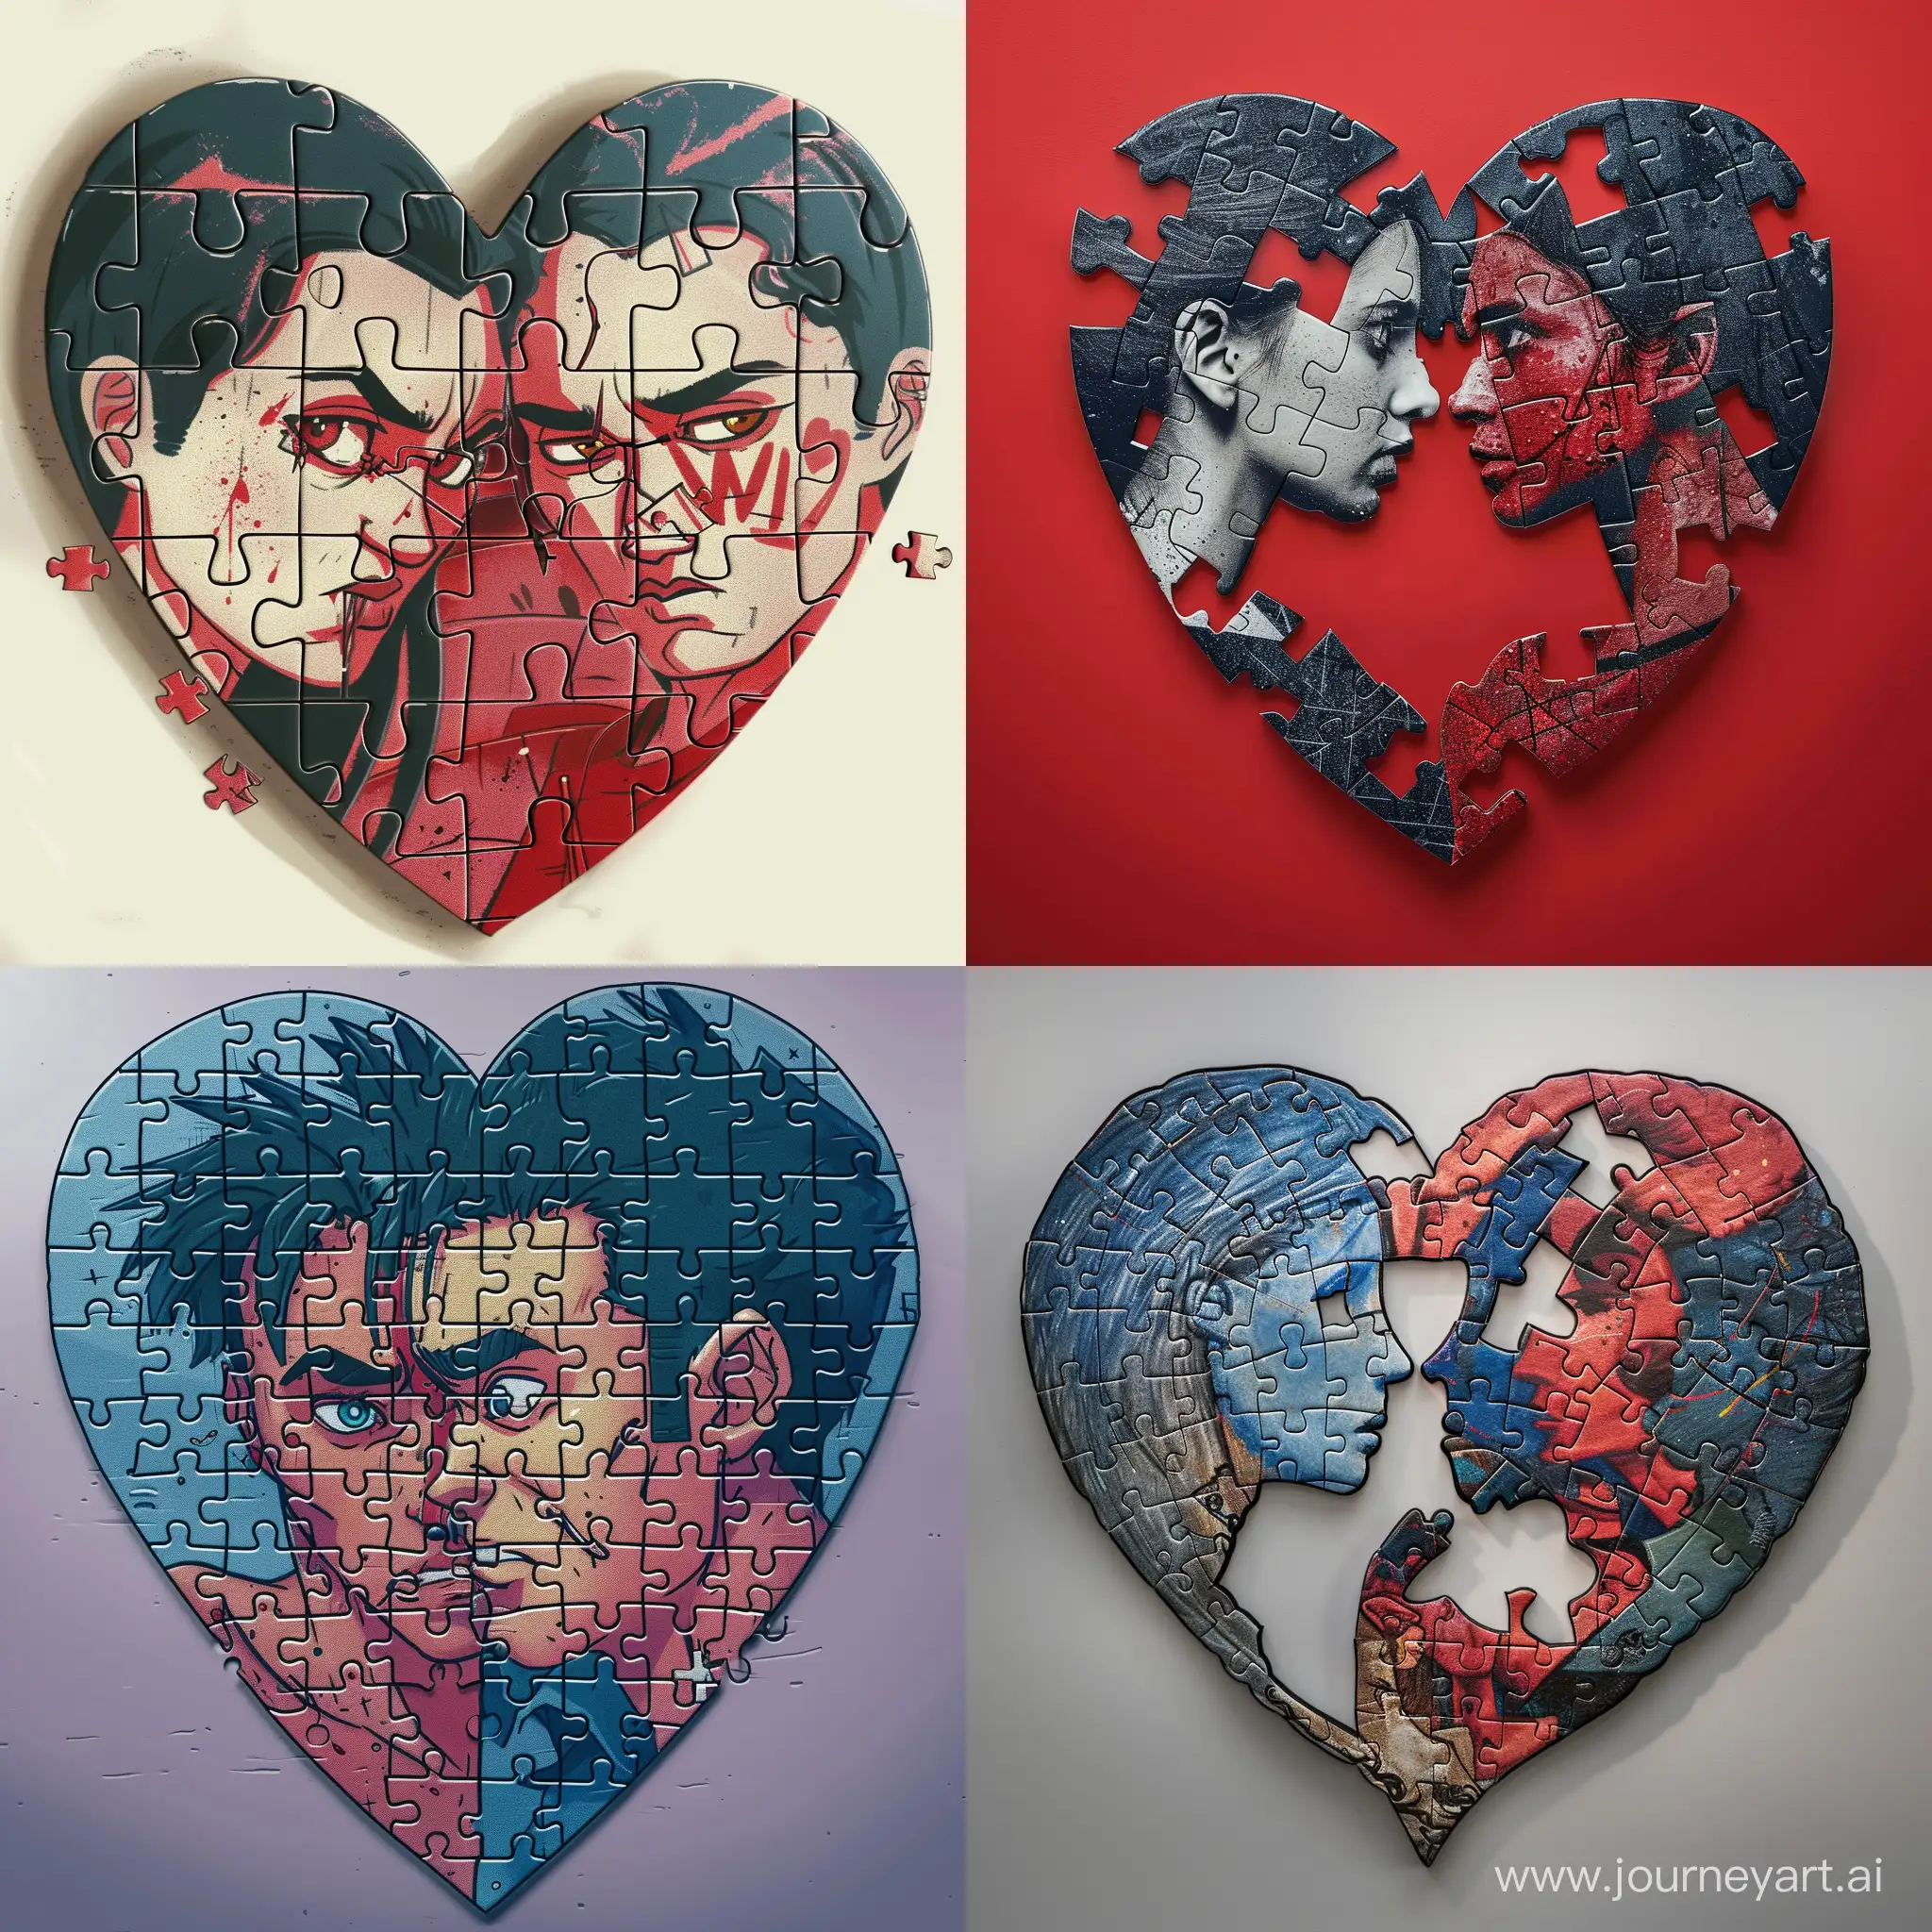 Emotional-HumanShaped-Jigsaw-Puzzle-Anger-Heartbreak-and-Love-Captured